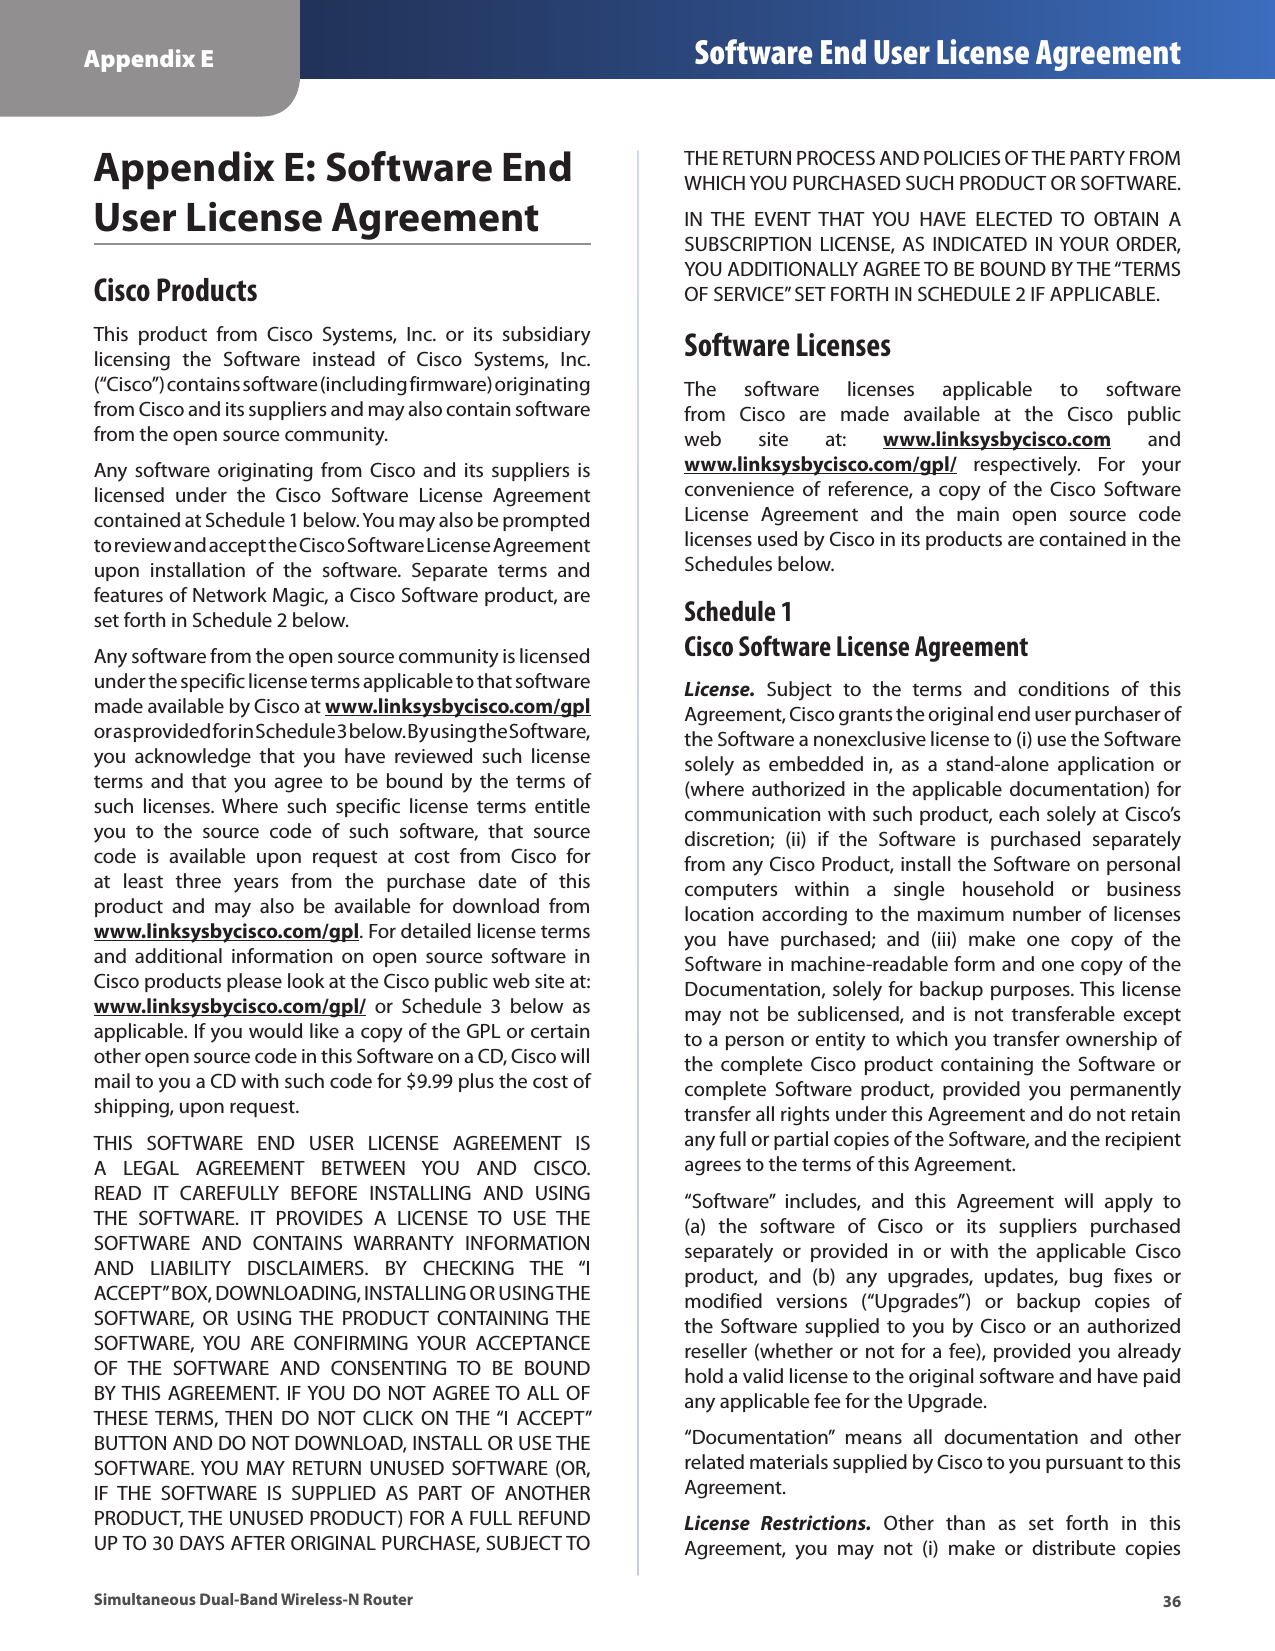 36Appendix E Software End User License AgreementSimultaneous Dual-Band Wireless-N RouterAppendix E: Software End User License AgreementCisco ProductsThis  product  from  Cisco  Systems,  Inc.  or  its  subsidiary licensing  the  Software  instead  of  Cisco  Systems,  Inc. (“Cisco”) contains software (including firmware) originating from Cisco and its suppliers and may also contain software from the open source community.Any software  originating from  Cisco and  its  suppliers  is licensed  under  the  Cisco  Software  License  Agreement contained at Schedule 1 below. You may also be prompted to review and accept the Cisco Software License Agreement upon  installation  of  the  software.  Separate  terms  and features of Network Magic, a Cisco Software product, are set forth in Schedule 2 below. Any software from the open source community is licensed under the specific license terms applicable to that software made available by Cisco at www.linksysbycisco.com/gpl or as provided for in Schedule 3 below. By using the Software, you  acknowledge  that  you  have  reviewed  such  license terms  and that  you  agree to  be bound  by the  terms of such  licenses.  Where  such  specific  license  terms  entitle you  to  the  source  code  of  such  software,  that  source code  is  available  upon  request  at  cost  from  Cisco  for at  least  three  years  from  the  purchase  date  of  this product  and  may  also  be  available  for  download  from www.linksysbycisco.com/gpl. For detailed license terms and  additional  information  on  open  source  software  in Cisco products please look at the Cisco public web site at: www.linksysbycisco.com/gpl/  or  Schedule  3  below  as applicable. If you would like a copy of the GPL or certain other open source code in this Software on a CD, Cisco will mail to you a CD with such code for $9.99 plus the cost of shipping, upon request.THIS  SOFTWARE  END  USER  LICENSE  AGREEMENT  IS A  LEGAL  AGREEMENT  BETWEEN  YOU  AND  CISCO. READ  IT  CAREFULLY  BEFORE  INSTALLING  AND  USING THE  SOFTWARE.  IT  PROVIDES  A  LICENSE  TO  USE  THE SOFTWARE  AND  CONTAINS  WARRANTY  INFORMATION AND  LIABILITY  DISCLAIMERS.  BY  CHECKING  THE  “I ACCEPT” BOX, DOWNLOADING, INSTALLING OR USING THE SOFTWARE,  OR  USING THE  PRODUCT  CONTAINING  THE SOFTWARE,  YOU  ARE  CONFIRMING  YOUR  ACCEPTANCE OF  THE  SOFTWARE  AND  CONSENTING  TO  BE  BOUND BY THIS AGREEMENT. IF YOU DO NOT AGREE TO ALL  OF THESE TERMS,  THEN  DO  NOT  CLICK  ON THE “I  ACCEPT” BUTTON AND DO NOT DOWNLOAD, INSTALL OR USE THE SOFTWARE. YOU  MAY  RETURN UNUSED  SOFTWARE (OR, IF  THE  SOFTWARE  IS  SUPPLIED  AS  PART  OF  ANOTHER PRODUCT, THE UNUSED PRODUCT) FOR A FULL REFUND UP TO 30 DAYS AFTER ORIGINAL PURCHASE, SUBJECT TO THE RETURN PROCESS AND POLICIES OF THE PARTY FROM WHICH YOU PURCHASED SUCH PRODUCT OR SOFTWARE.IN  THE  EVENT  THAT  YOU  HAVE  ELECTED  TO  OBTAIN  A SUBSCRIPTION LICENSE,  AS INDICATED  IN YOUR ORDER, YOU ADDITIONALLY AGREE TO BE BOUND BY THE “TERMS OF SERVICE” SET FORTH IN SCHEDULE 2 IF APPLICABLE.Software LicensesThe  software  licenses  applicable  to  software from  Cisco  are  made  available  at  the  Cisco  public web  site  at:  www.linksysbycisco.com  and www.linksysbycisco.com/gpl/  respectively.  For  your convenience  of  reference,  a  copy  of  the  Cisco  Software License  Agreement  and  the  main  open  source  code licenses used by Cisco in its products are contained in the Schedules below.Schedule 1 Cisco Software License AgreementLicense.  Subject  to  the  terms  and  conditions  of  this Agreement, Cisco grants the original end user purchaser of the Software a nonexclusive license to (i) use the Software solely  as  embedded  in,  as  a  stand-alone  application  or (where authorized in  the applicable documentation) for communication with such product, each solely at Cisco’s discretion;  (ii)  if  the  Software  is  purchased  separately from any Cisco Product, install the Software on personal computers  within  a  single  household  or  business location according to  the  maximum number  of licenses you  have  purchased;  and  (iii)  make  one  copy  of  the Software in machine-readable form and one copy of the Documentation, solely for backup purposes. This license may  not  be  sublicensed,  and  is  not  transferable  except to a person or entity to which you transfer ownership of the  complete  Cisco product  containing  the Software  or complete  Software  product,  provided  you  permanently transfer all rights under this Agreement and do not retain any full or partial copies of the Software, and the recipient agrees to the terms of this Agreement. “Software”  includes,  and  this  Agreement  will  apply  to  (a)  the  software  of  Cisco  or  its  suppliers  purchased separately  or  provided  in  or  with  the  applicable  Cisco product,  and  (b)  any  upgrades,  updates,  bug  fixes  or modified  versions  (“Upgrades”)  or  backup  copies  of the Software supplied  to  you  by  Cisco  or an authorized reseller (whether or not for a fee), provided you already hold a valid license to the original software and have paid any applicable fee for the Upgrade. “Documentation”  means  all  documentation  and  other related materials supplied by Cisco to you pursuant to this Agreement.License  Restrictions.  Other  than  as  set  forth  in  this Agreement,  you  may  not  (i)  make  or  distribute  copies 